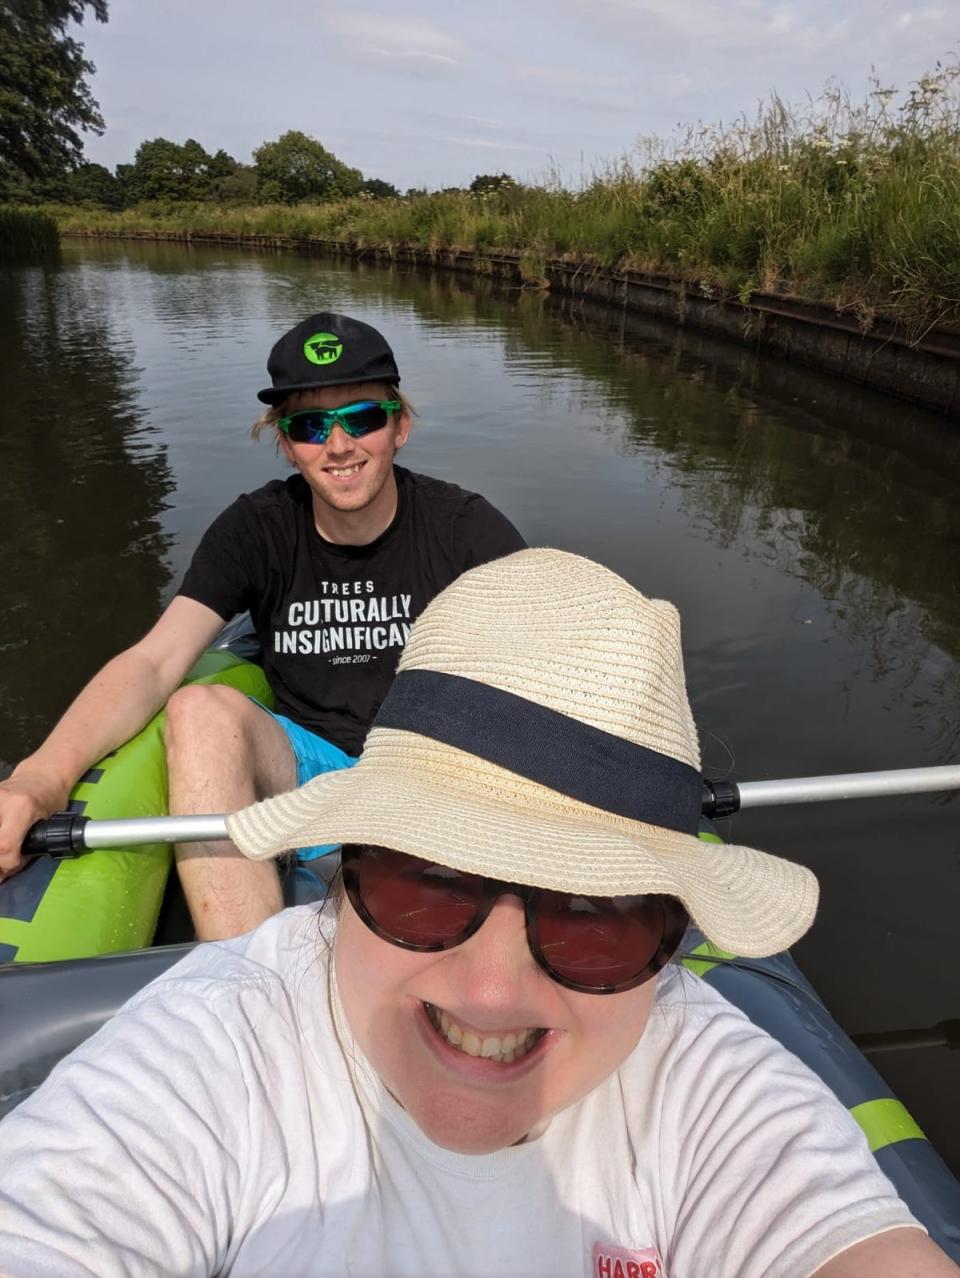 Jeff and Alice taking their canoe out on their local canal (Handout)